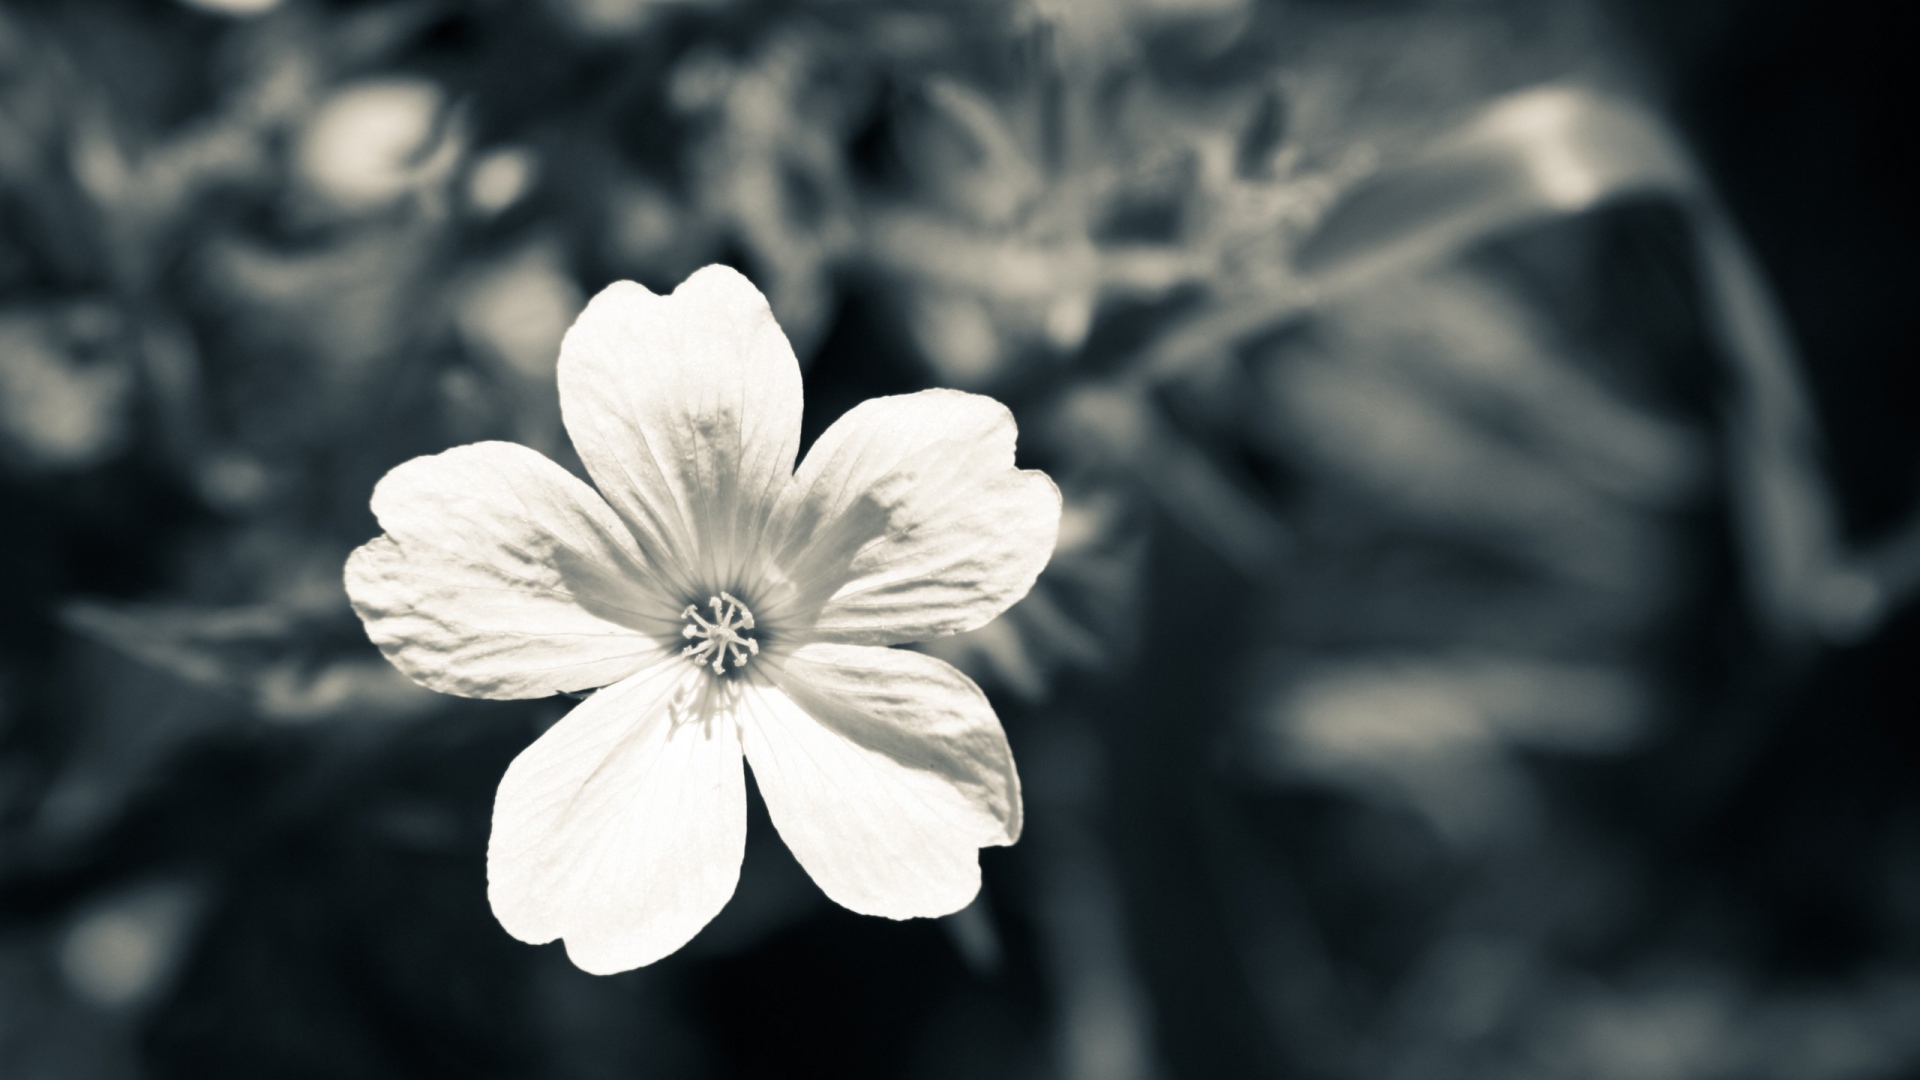 Black And White Flower Photography Wallpaper On